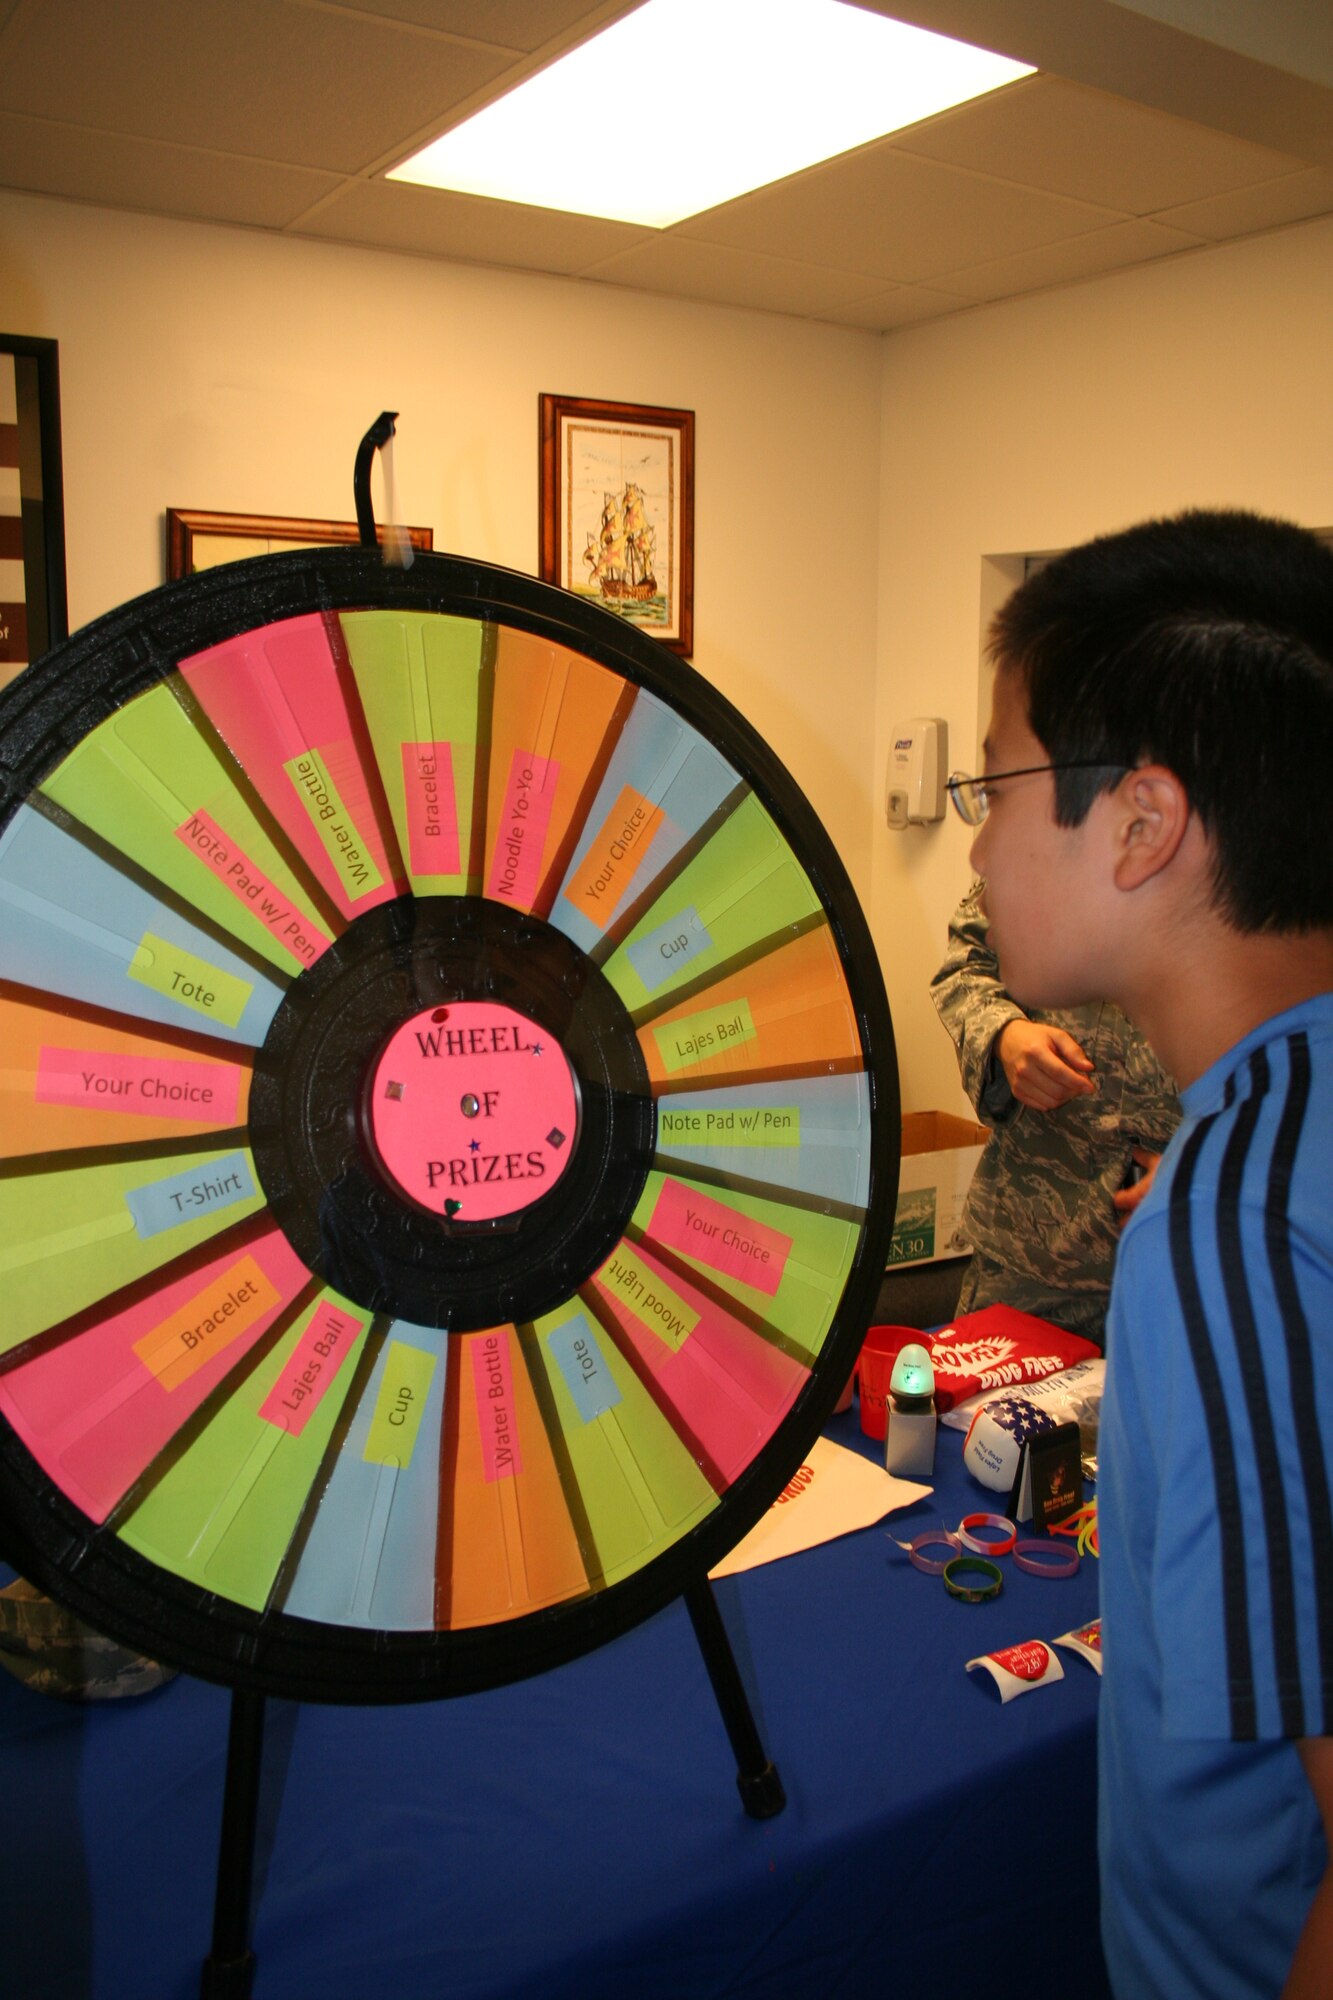 Yohei, who is the son of Hitomi Sparks, a dependent here at Lajes Field, watches as the “Wheel of Prizes” spins while he waits to find out what he has won for answering a question about health and wellness correctly at the health fair during the School and Sports Physical Day held at the Lajes Field clinic Aug 20. The health fair highlighted dental education, physical fitness tips and health and wellness information. During this one day event, the 65th Medical Group handled around 120 appointments preparing the children at Lajes Field for the new school year and to be able to participate in youth sports. (U.S. Air Force photo by Capt. George Tobias)